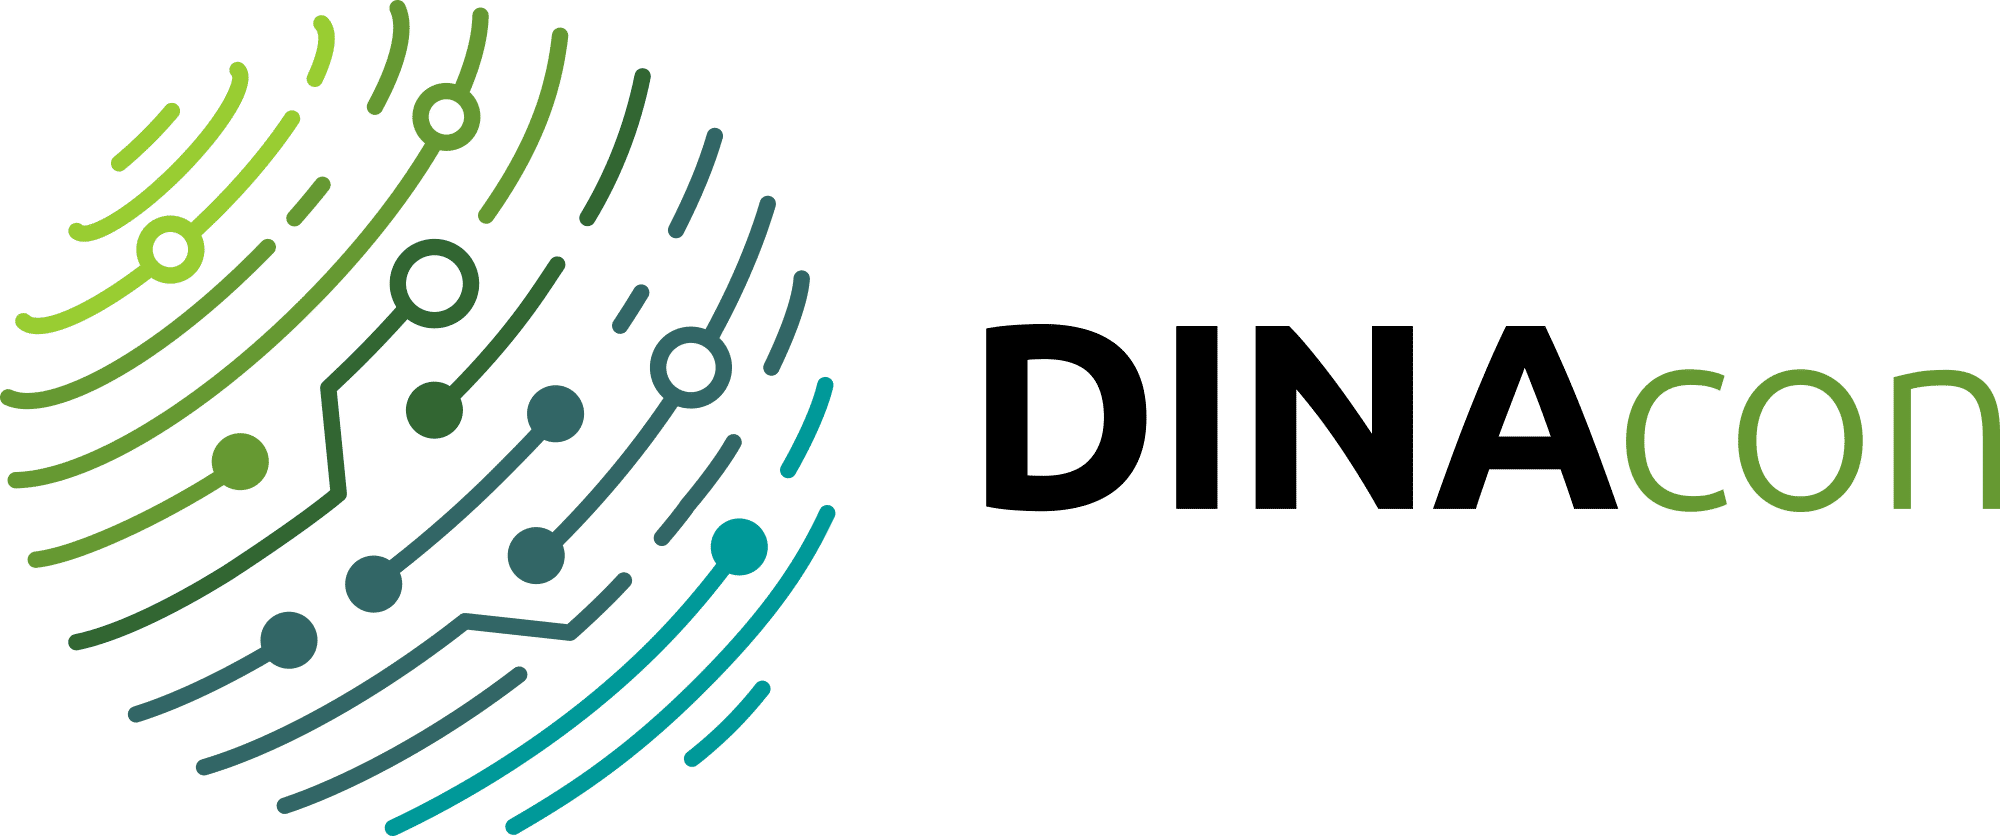 picture of a banner or logo from DINAcon